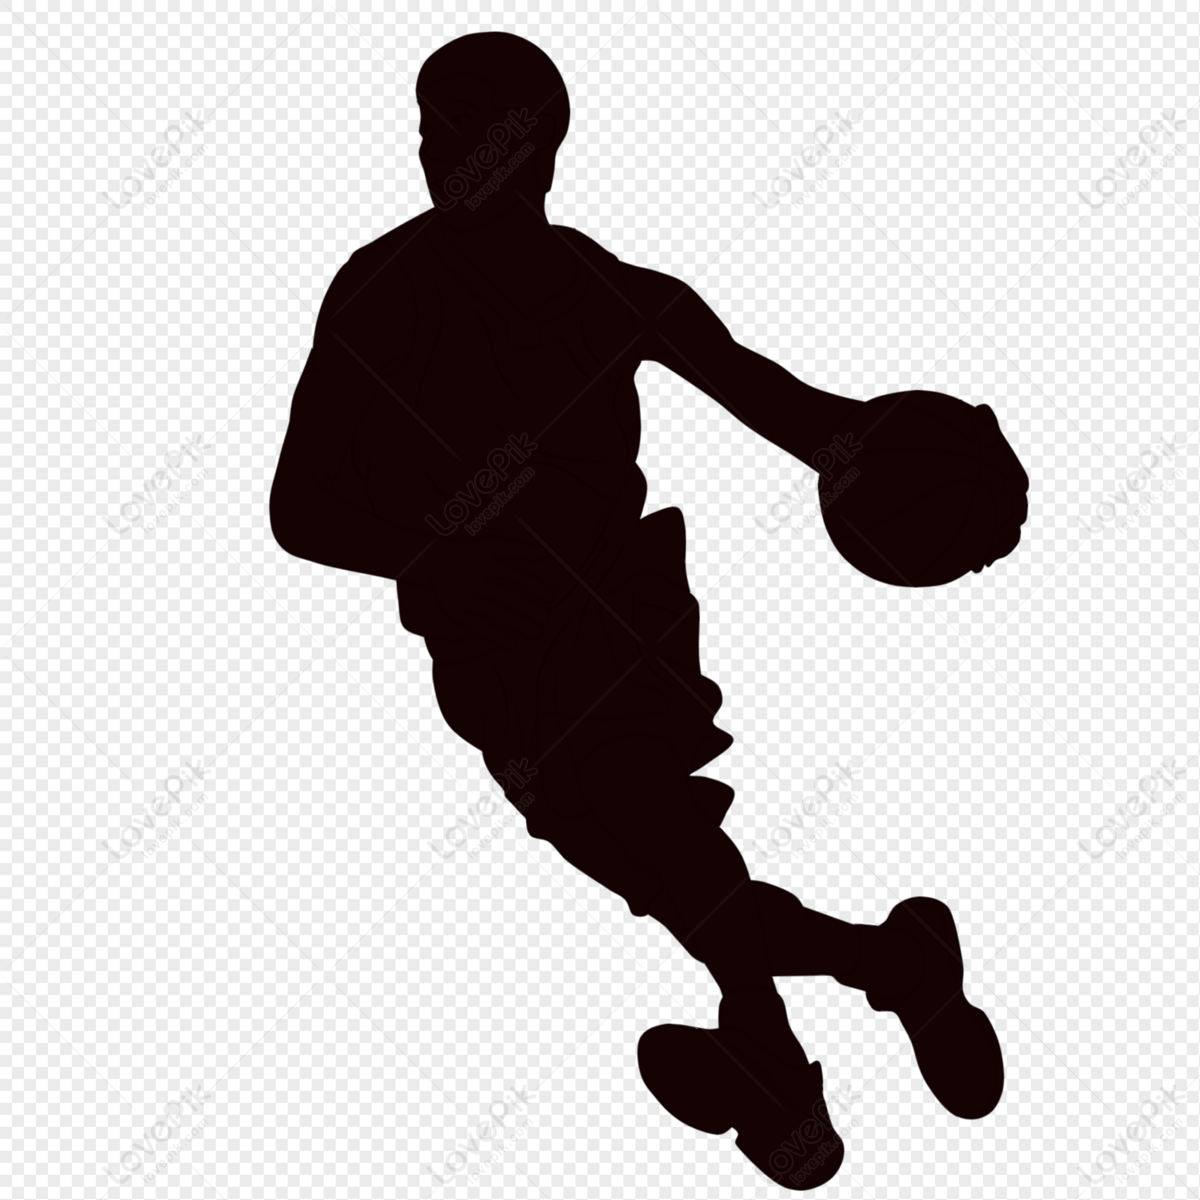 Nba Star Silhouette PNG Transparent Image And Clipart Image For Free ...